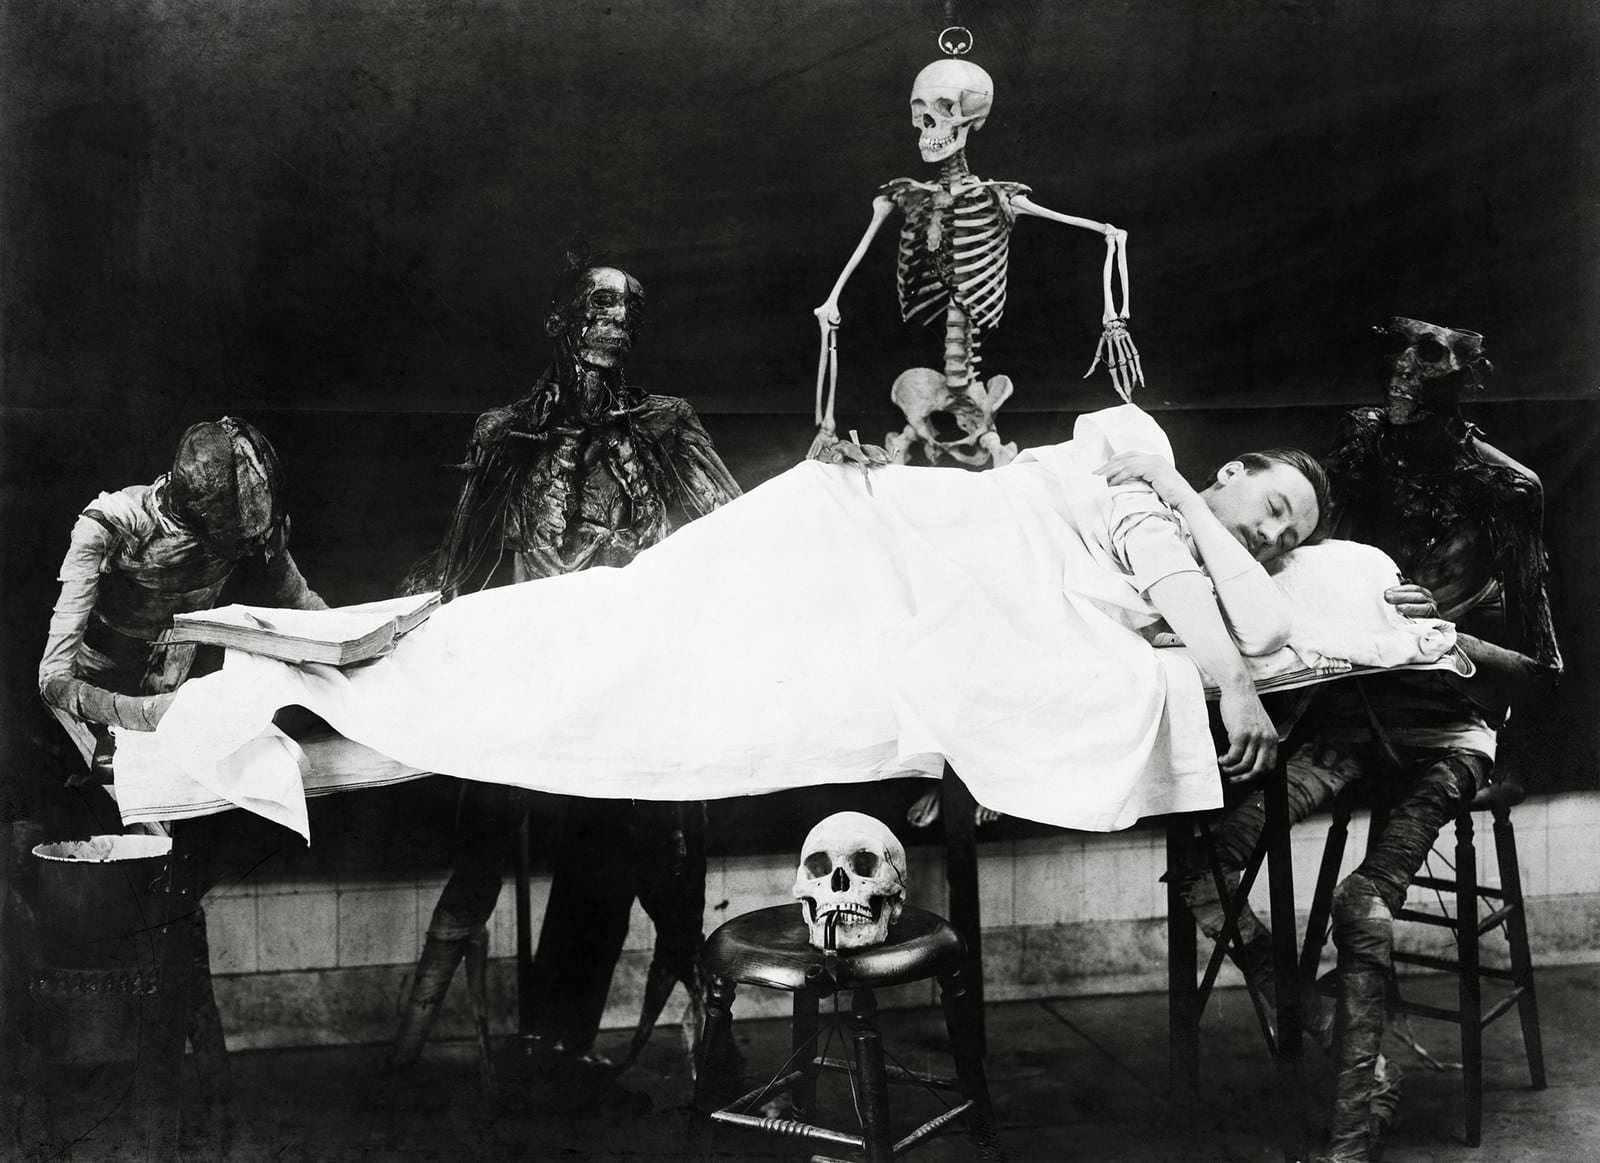 This macabre scene of a mortician haunted by his day job in 1910